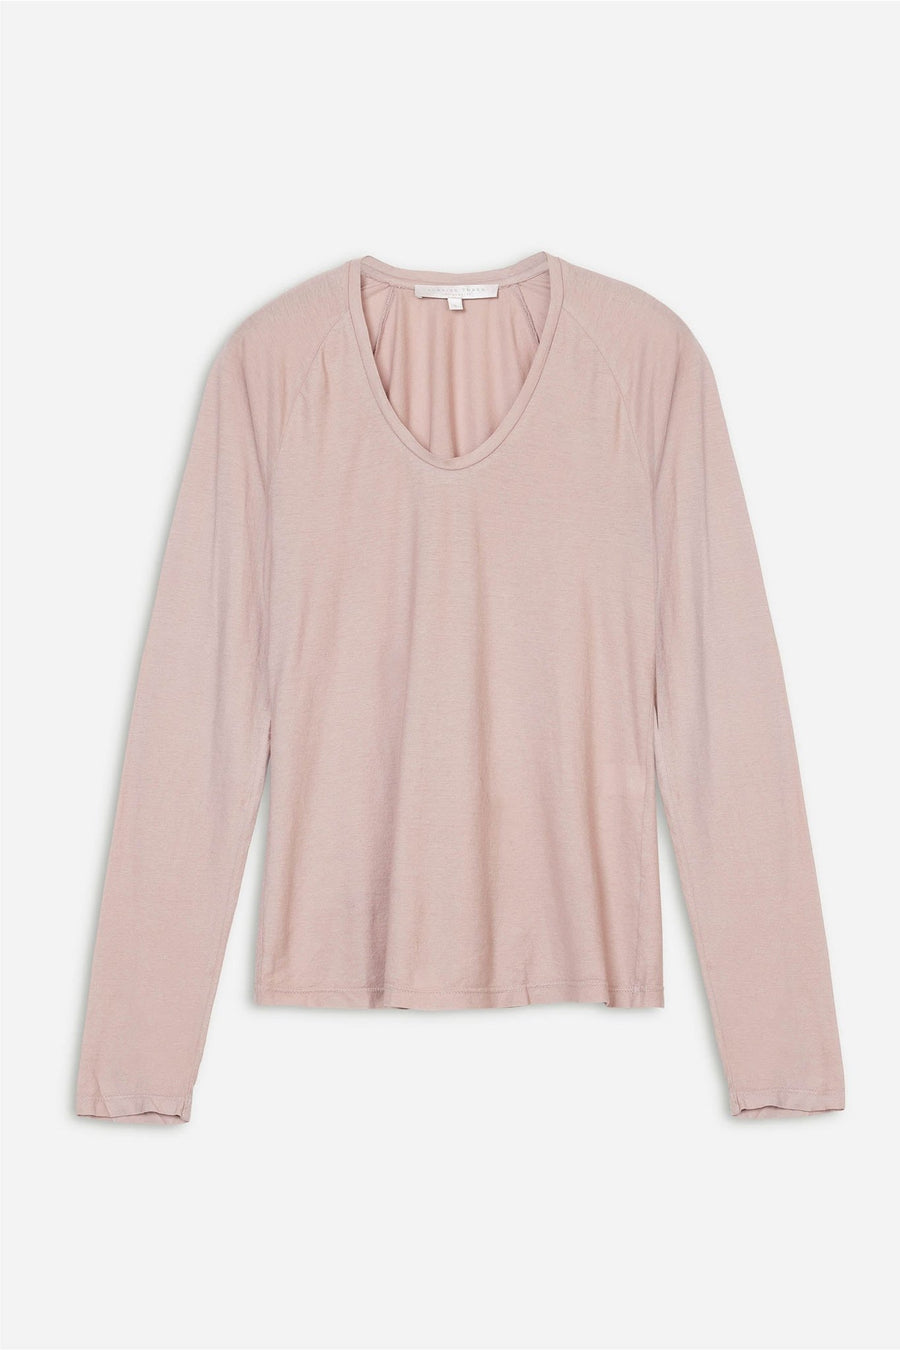 P.C.H. LONG SLEEVE SCOOP NECK TEE, ORCHID - Burning Torch Online Boutique